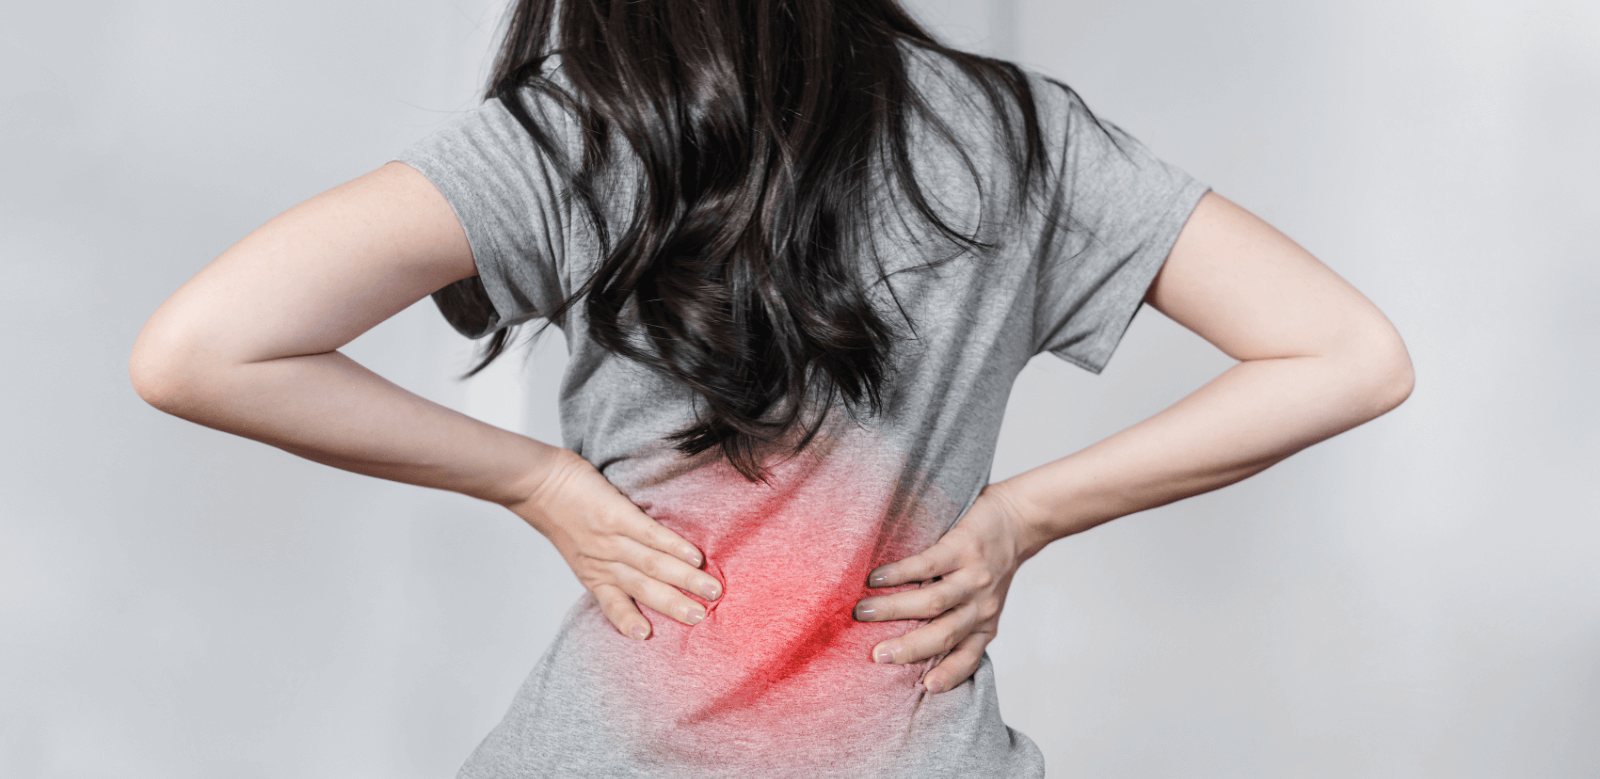 How Anxiety Causes Back Pain And How To Stop It